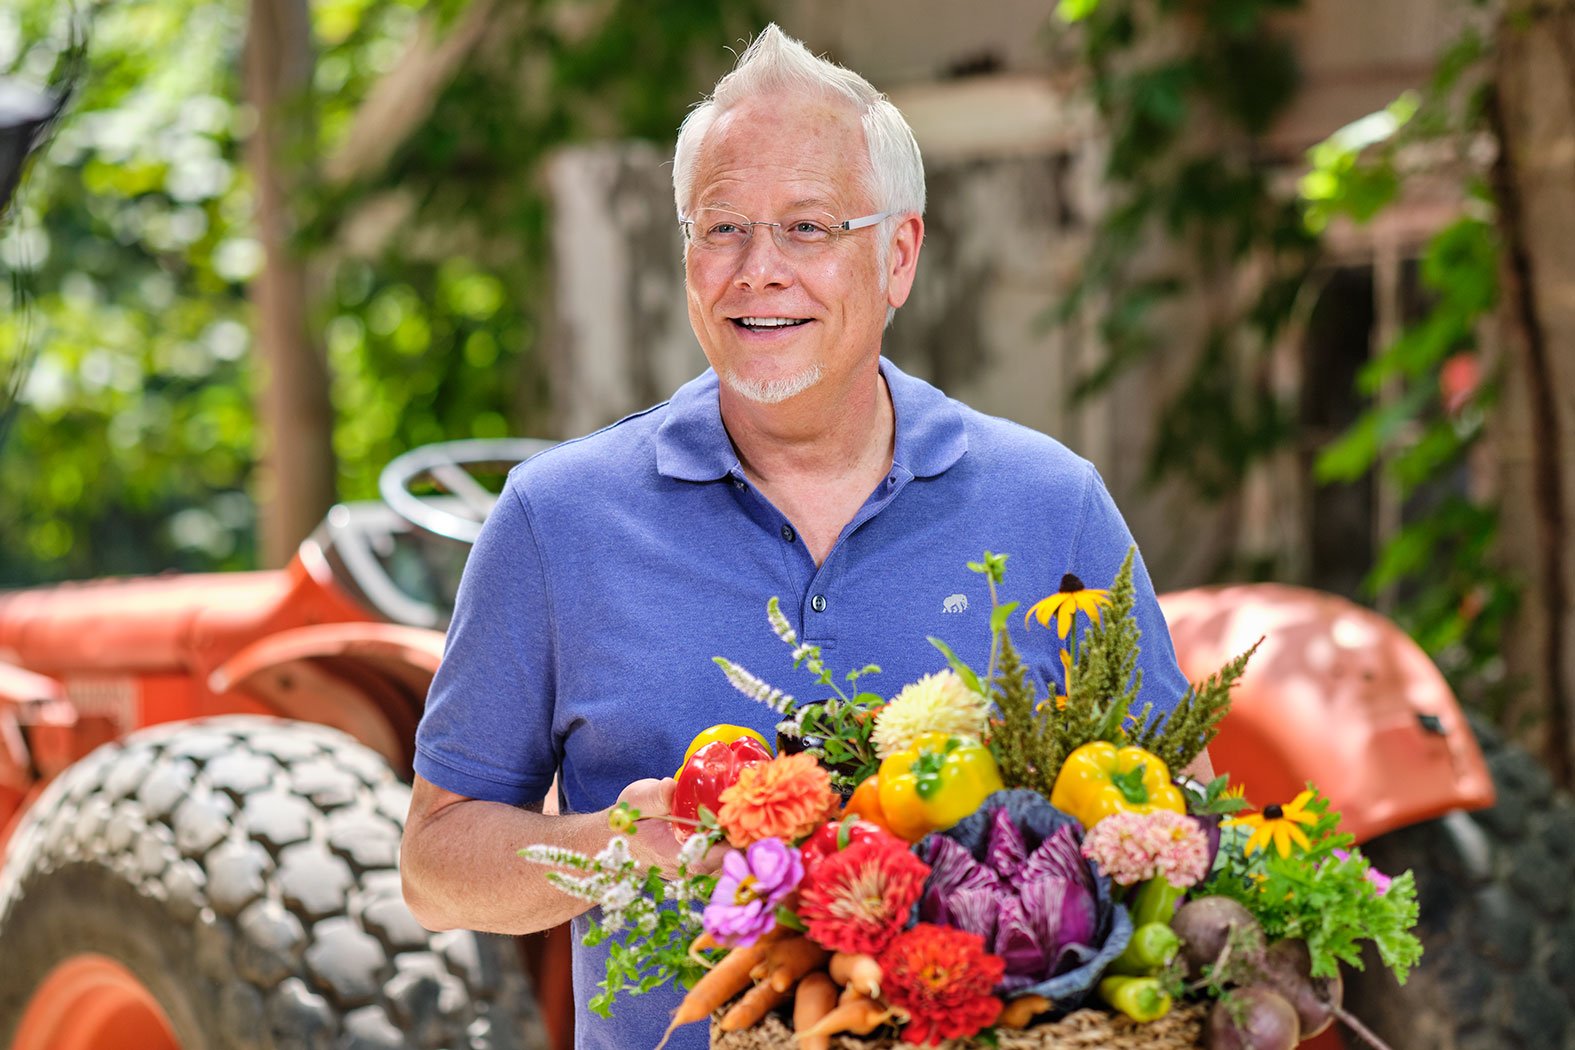 "Anything can be paired with Flowers” - quips J Schwanke- host of American Public Television’s “J Schwanke’s Life in Bloom”- here J creates a bouquet with Fresh Flowers and Produce- while visiting a local farm in Michigan!